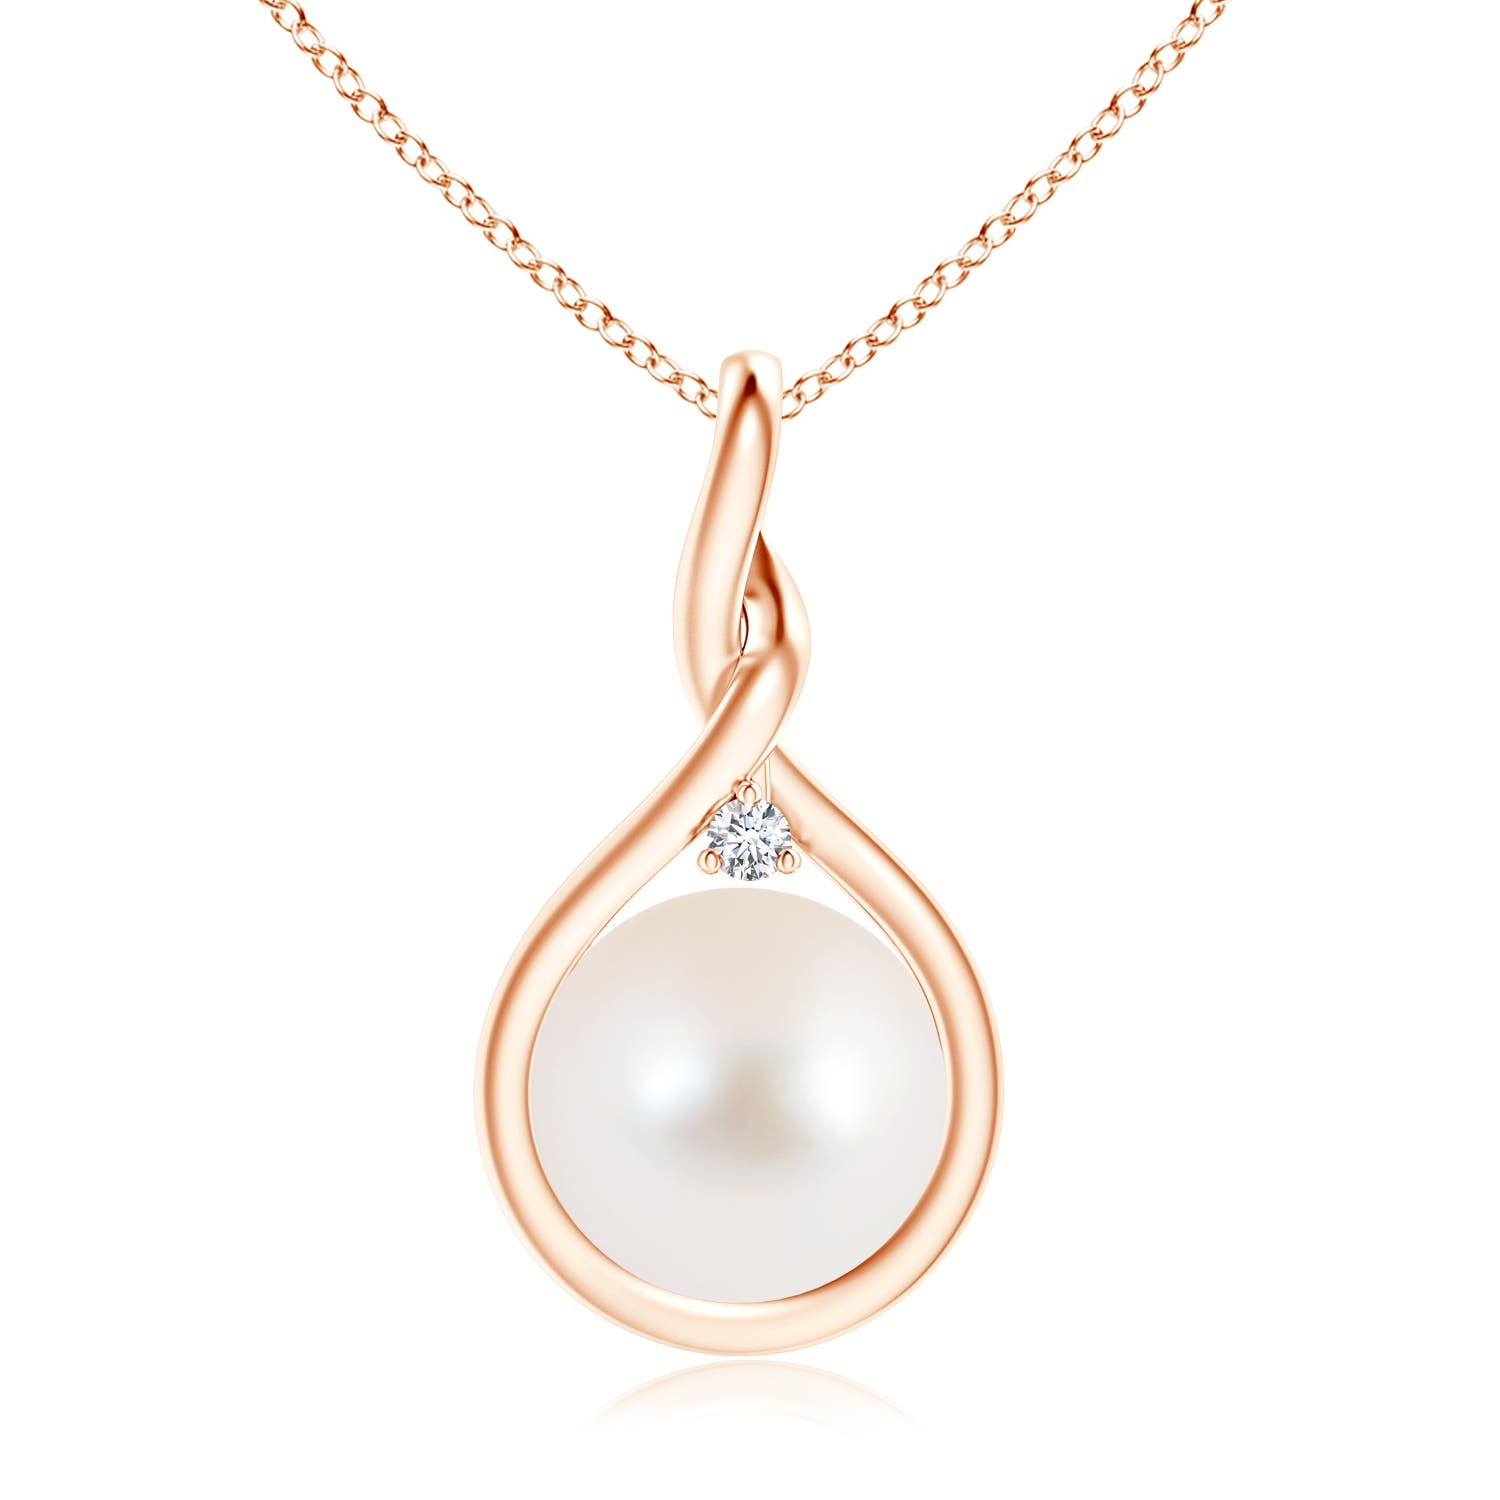 AAA / 7.24 CT / 14 KT Rose Gold